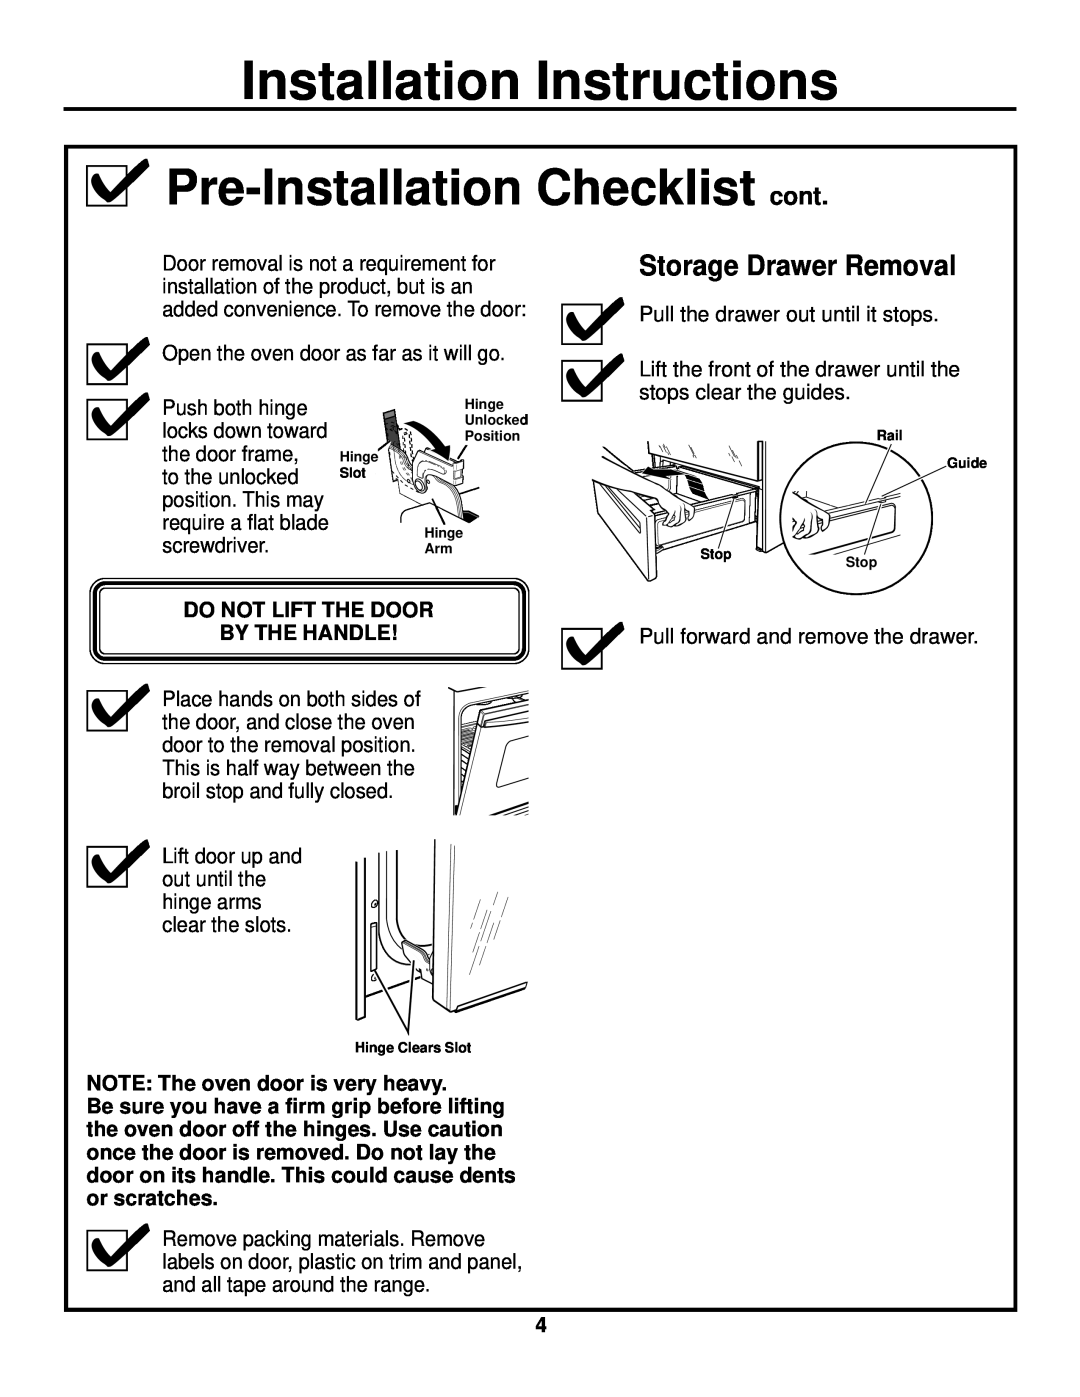 GE JS905 Pre-Installation Checklist cont, Storage Drawer Removal, Do Not Lift The Door, By The Handle 